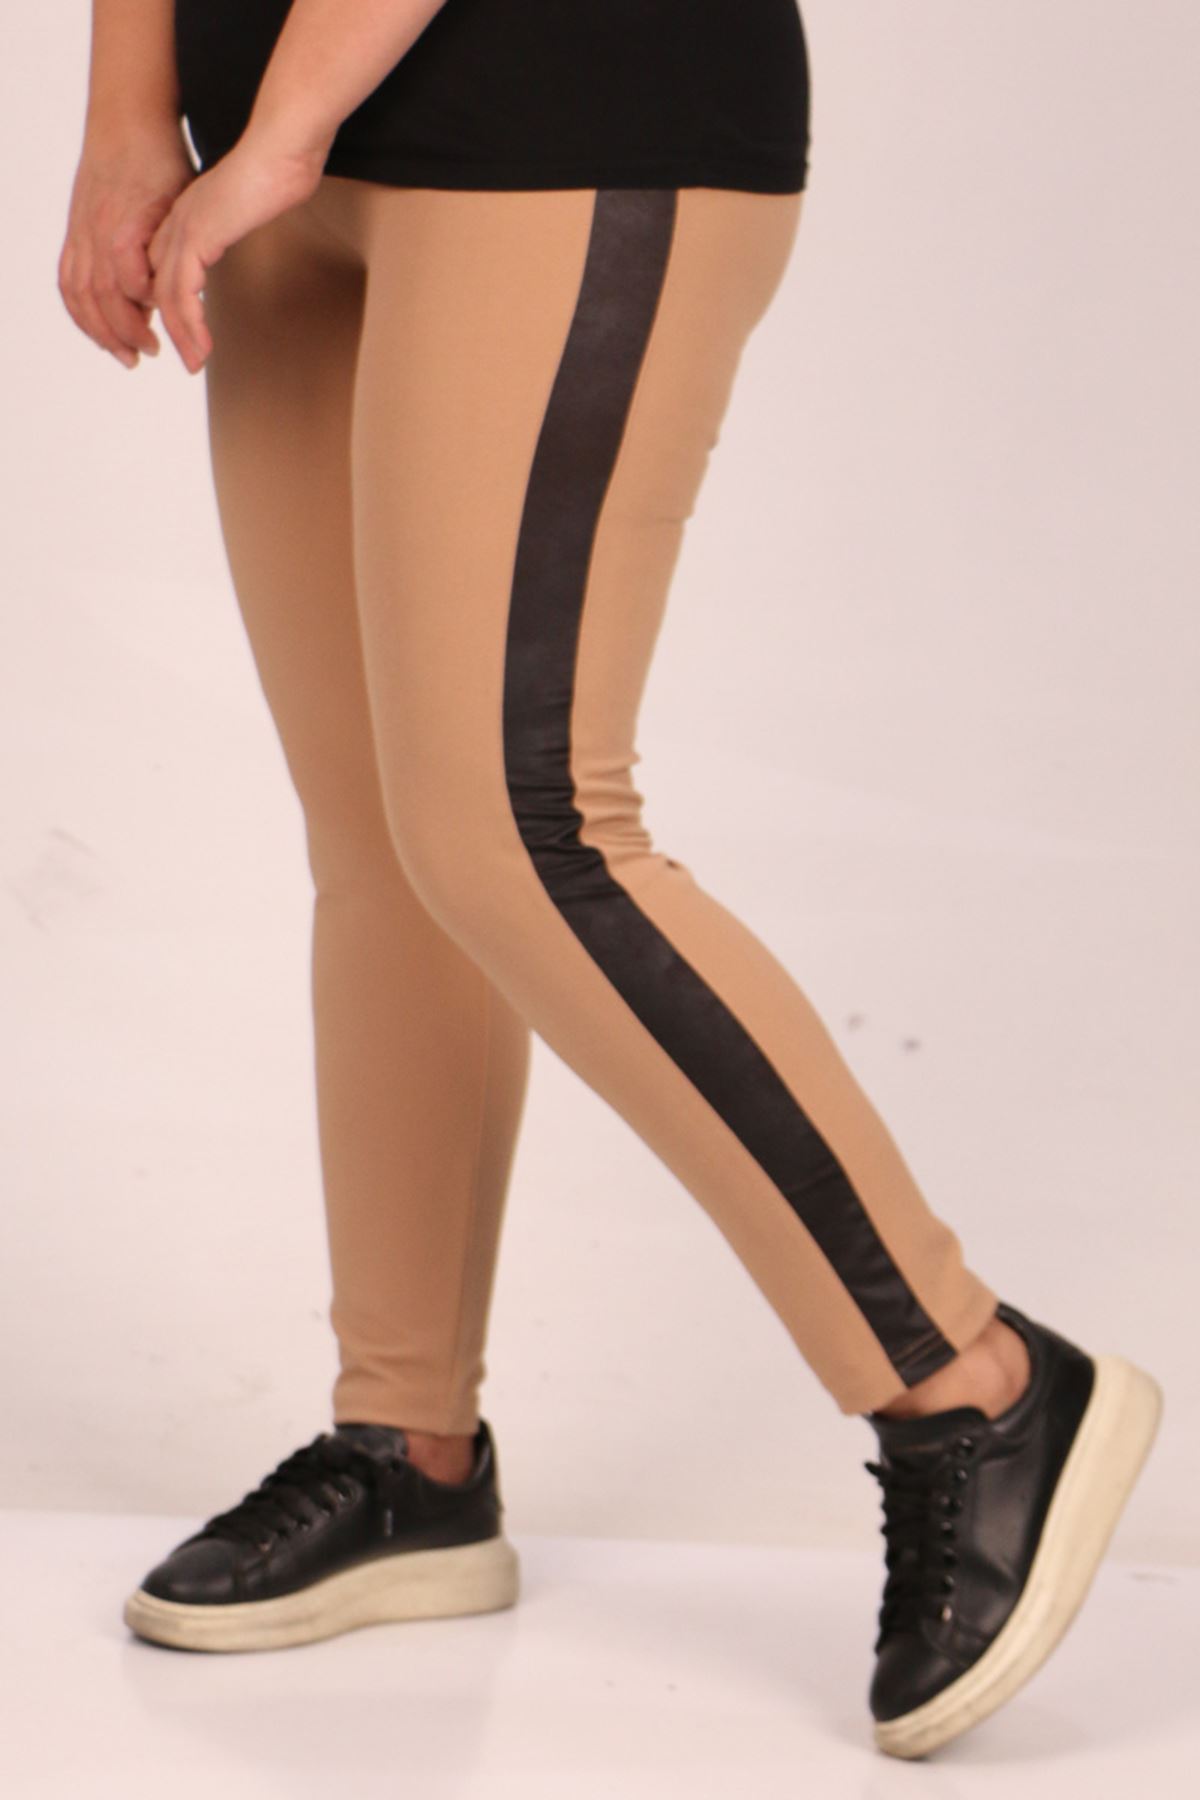 29504 Large Size Scuba Tights with Side Waterport-Mink